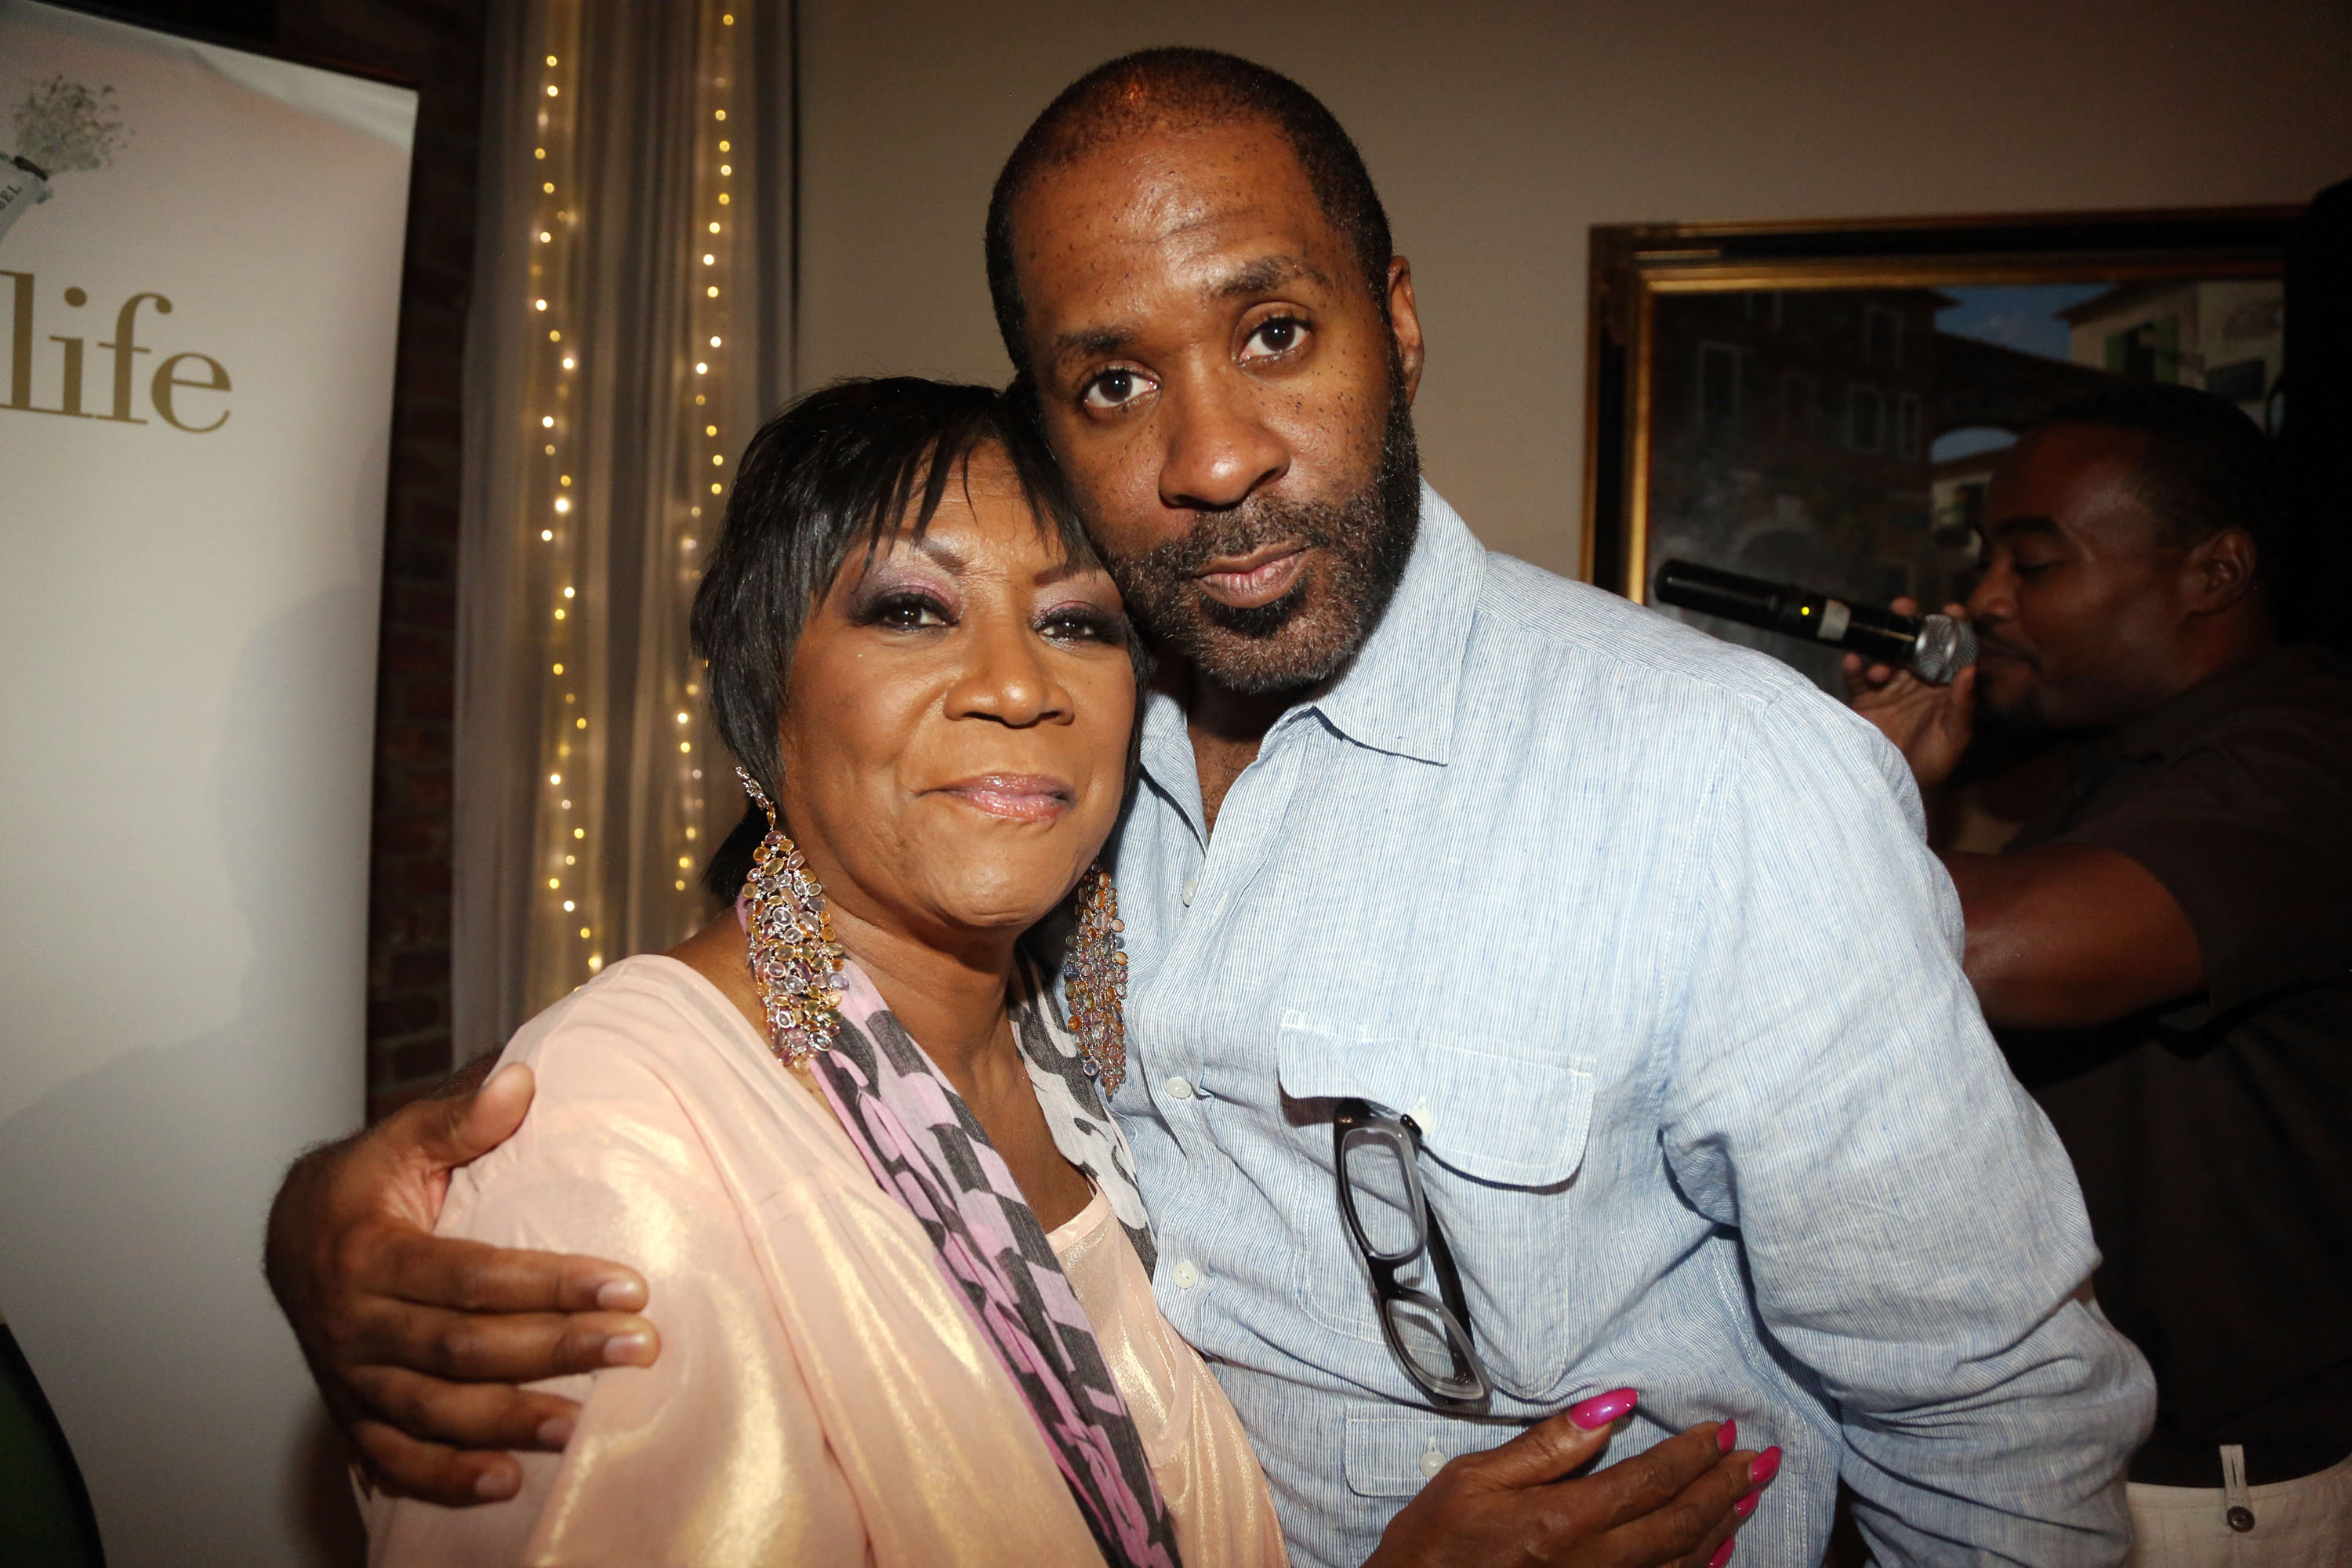 Patti Labelle and her son Zuri Edwards at her 70th birthday celebration on June 30, 2014, in Millburn, New Jersey. | Source: Getty Images